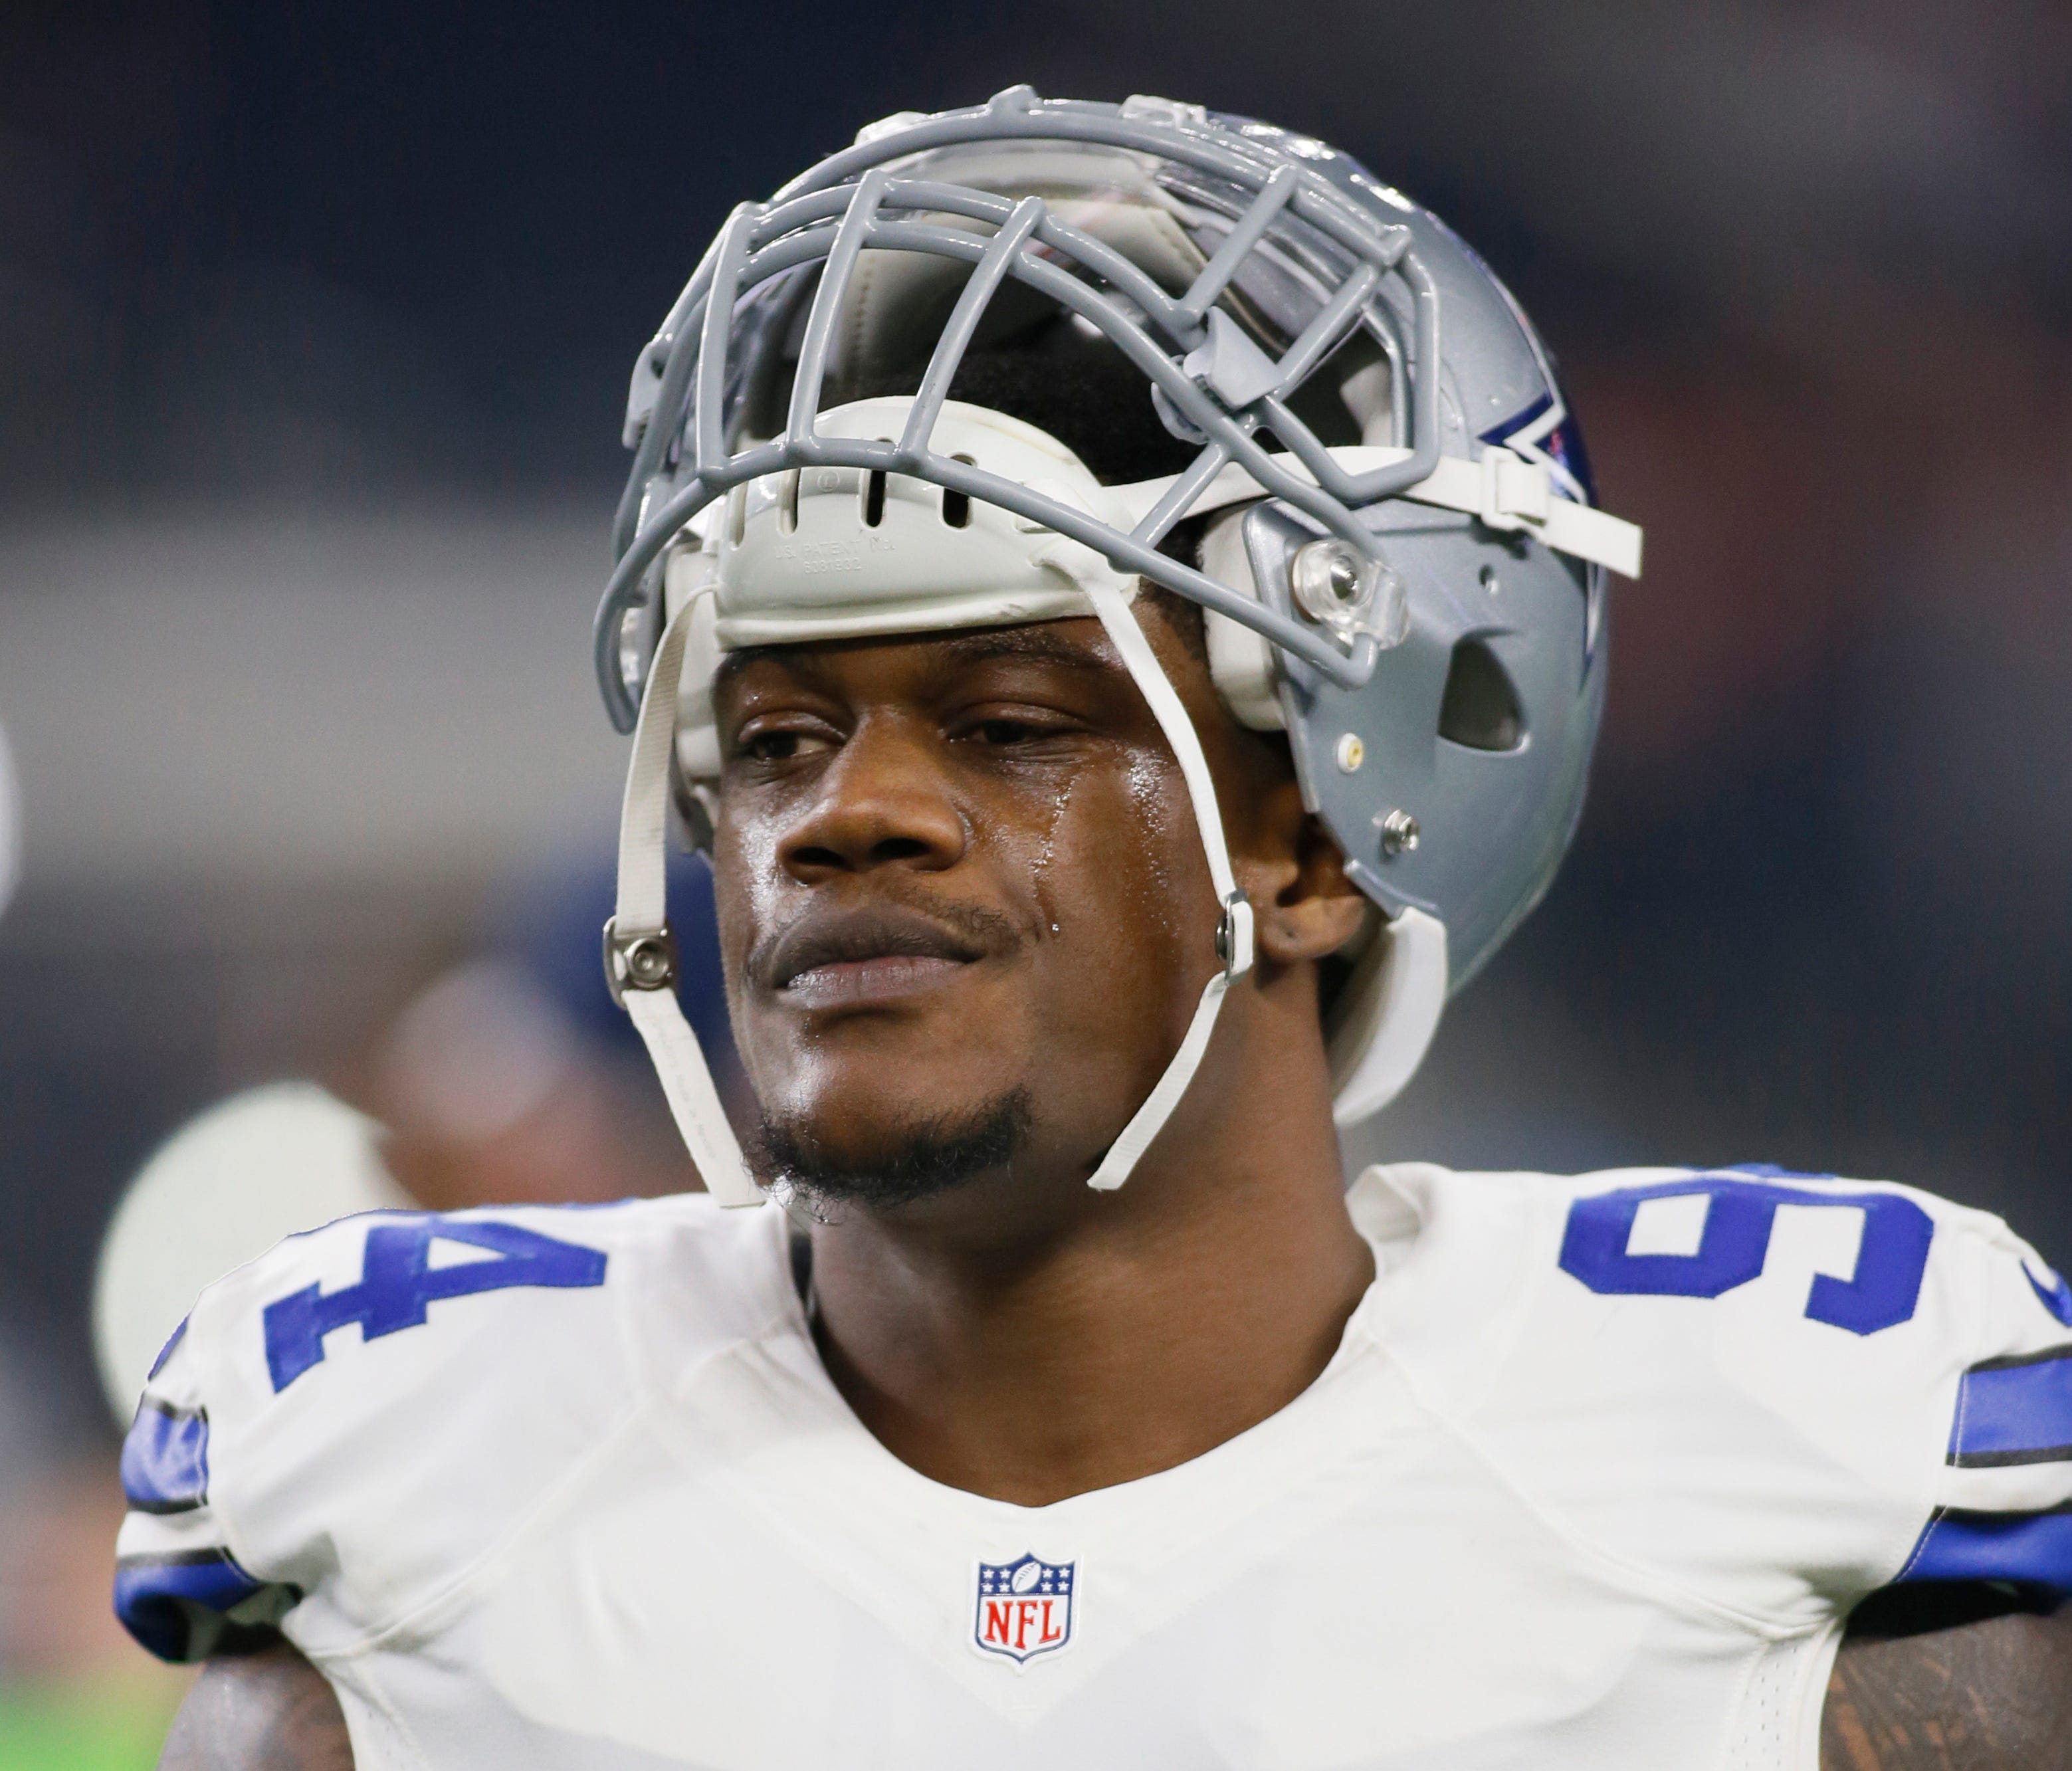 Dallas Cowboys defensive end Randy Gregory (94) on the field before the game against the Detroit Lions at AT&T Stadium.